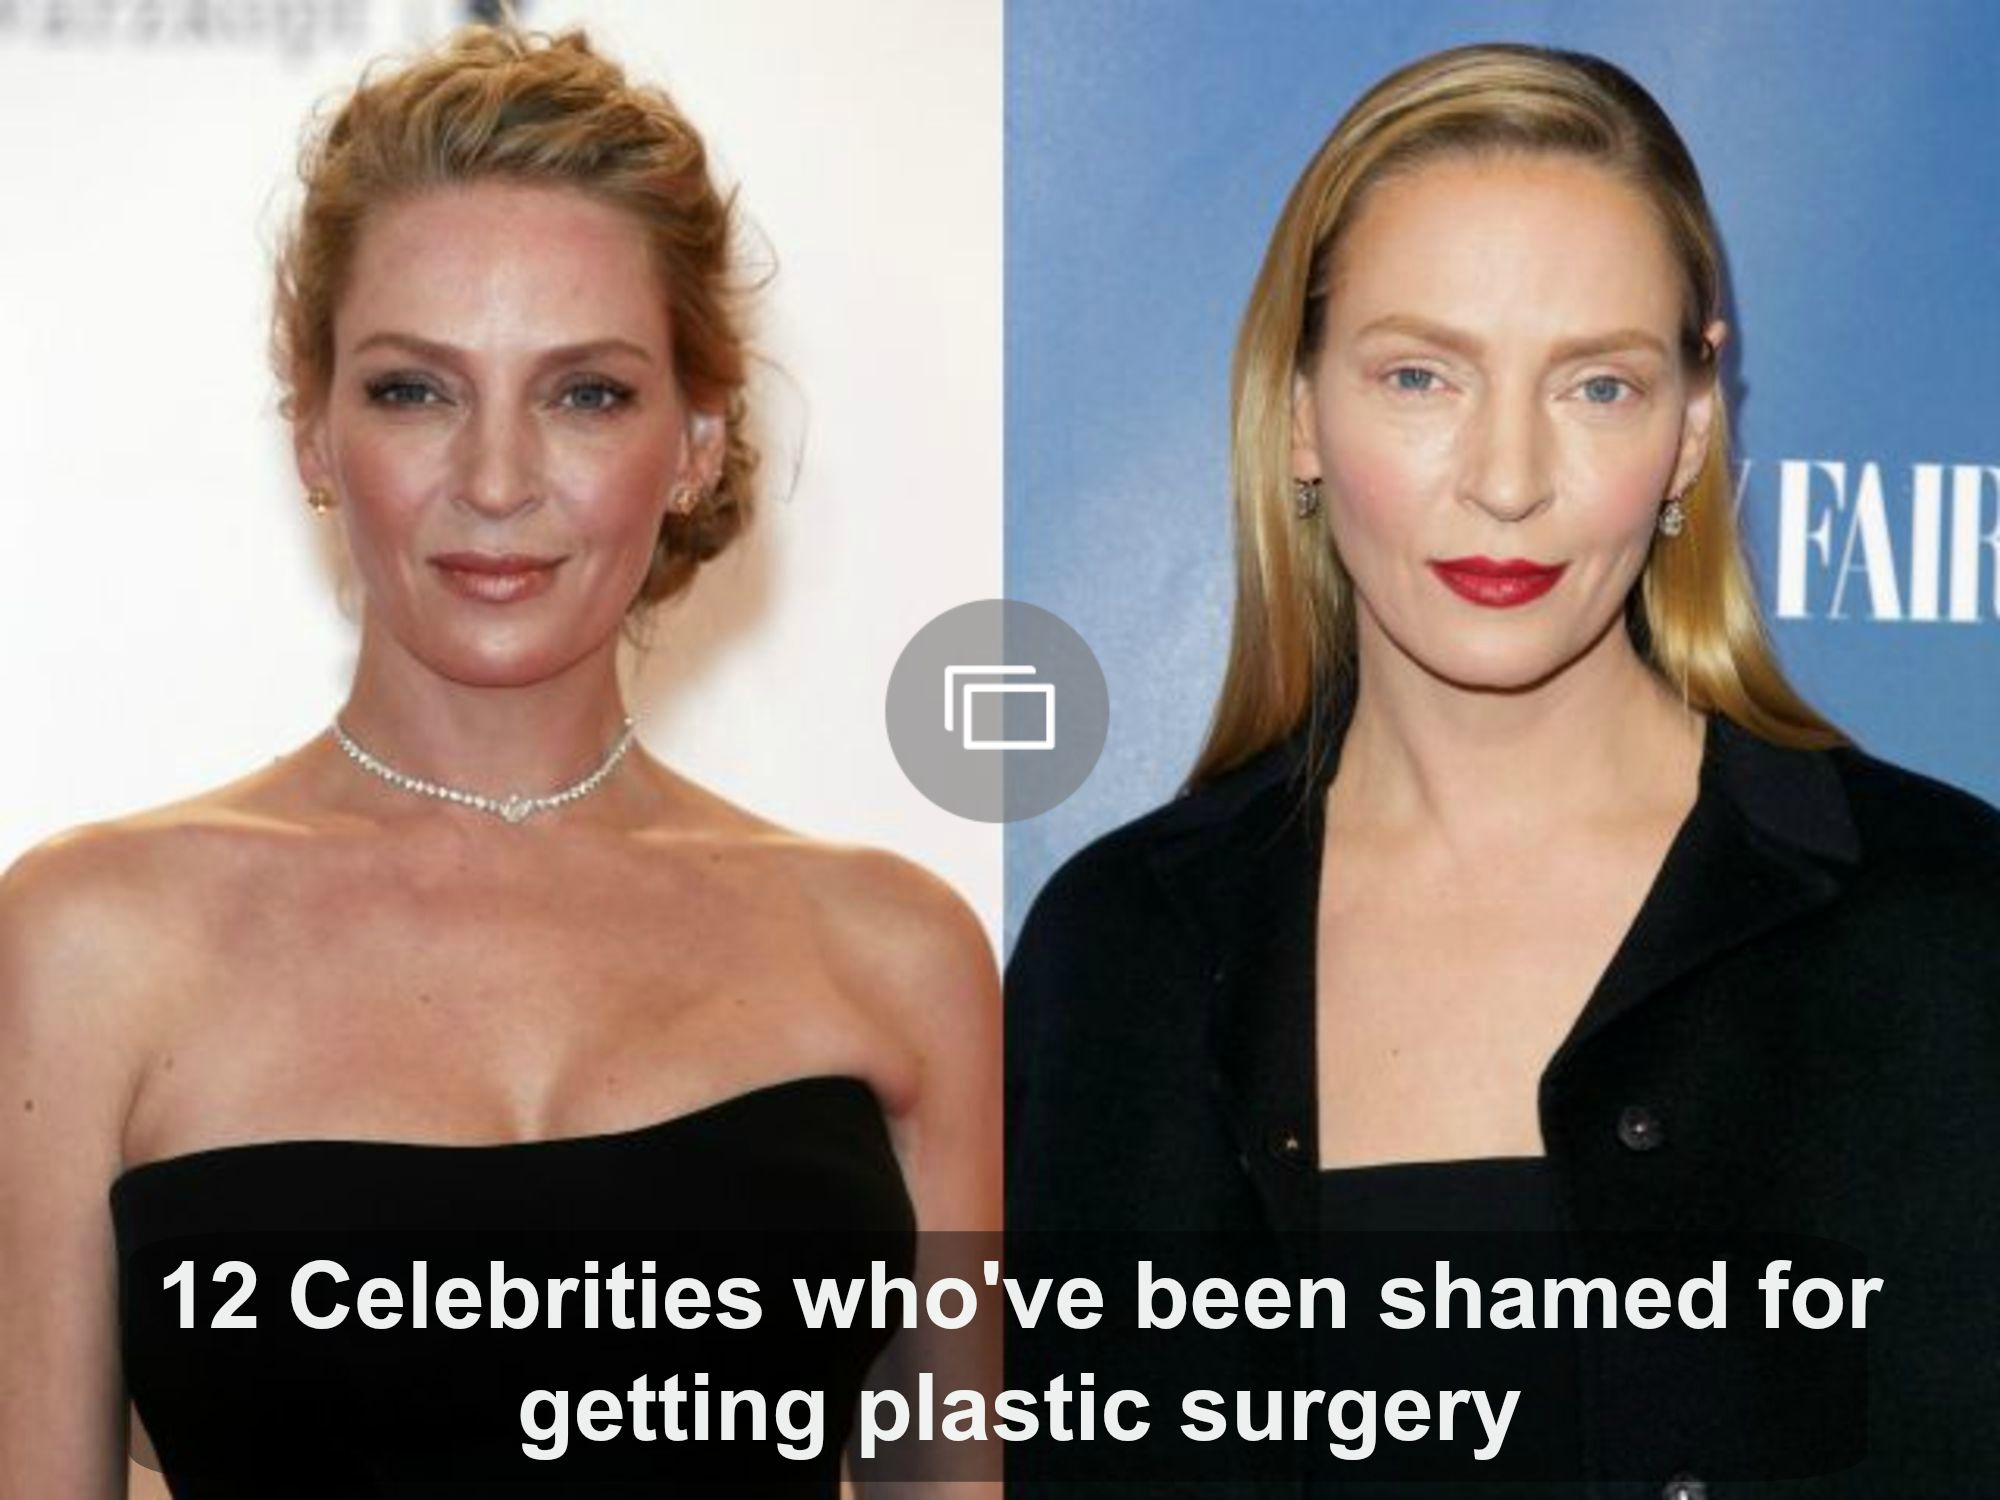 Celebrities who've been shamed for plastic surgery